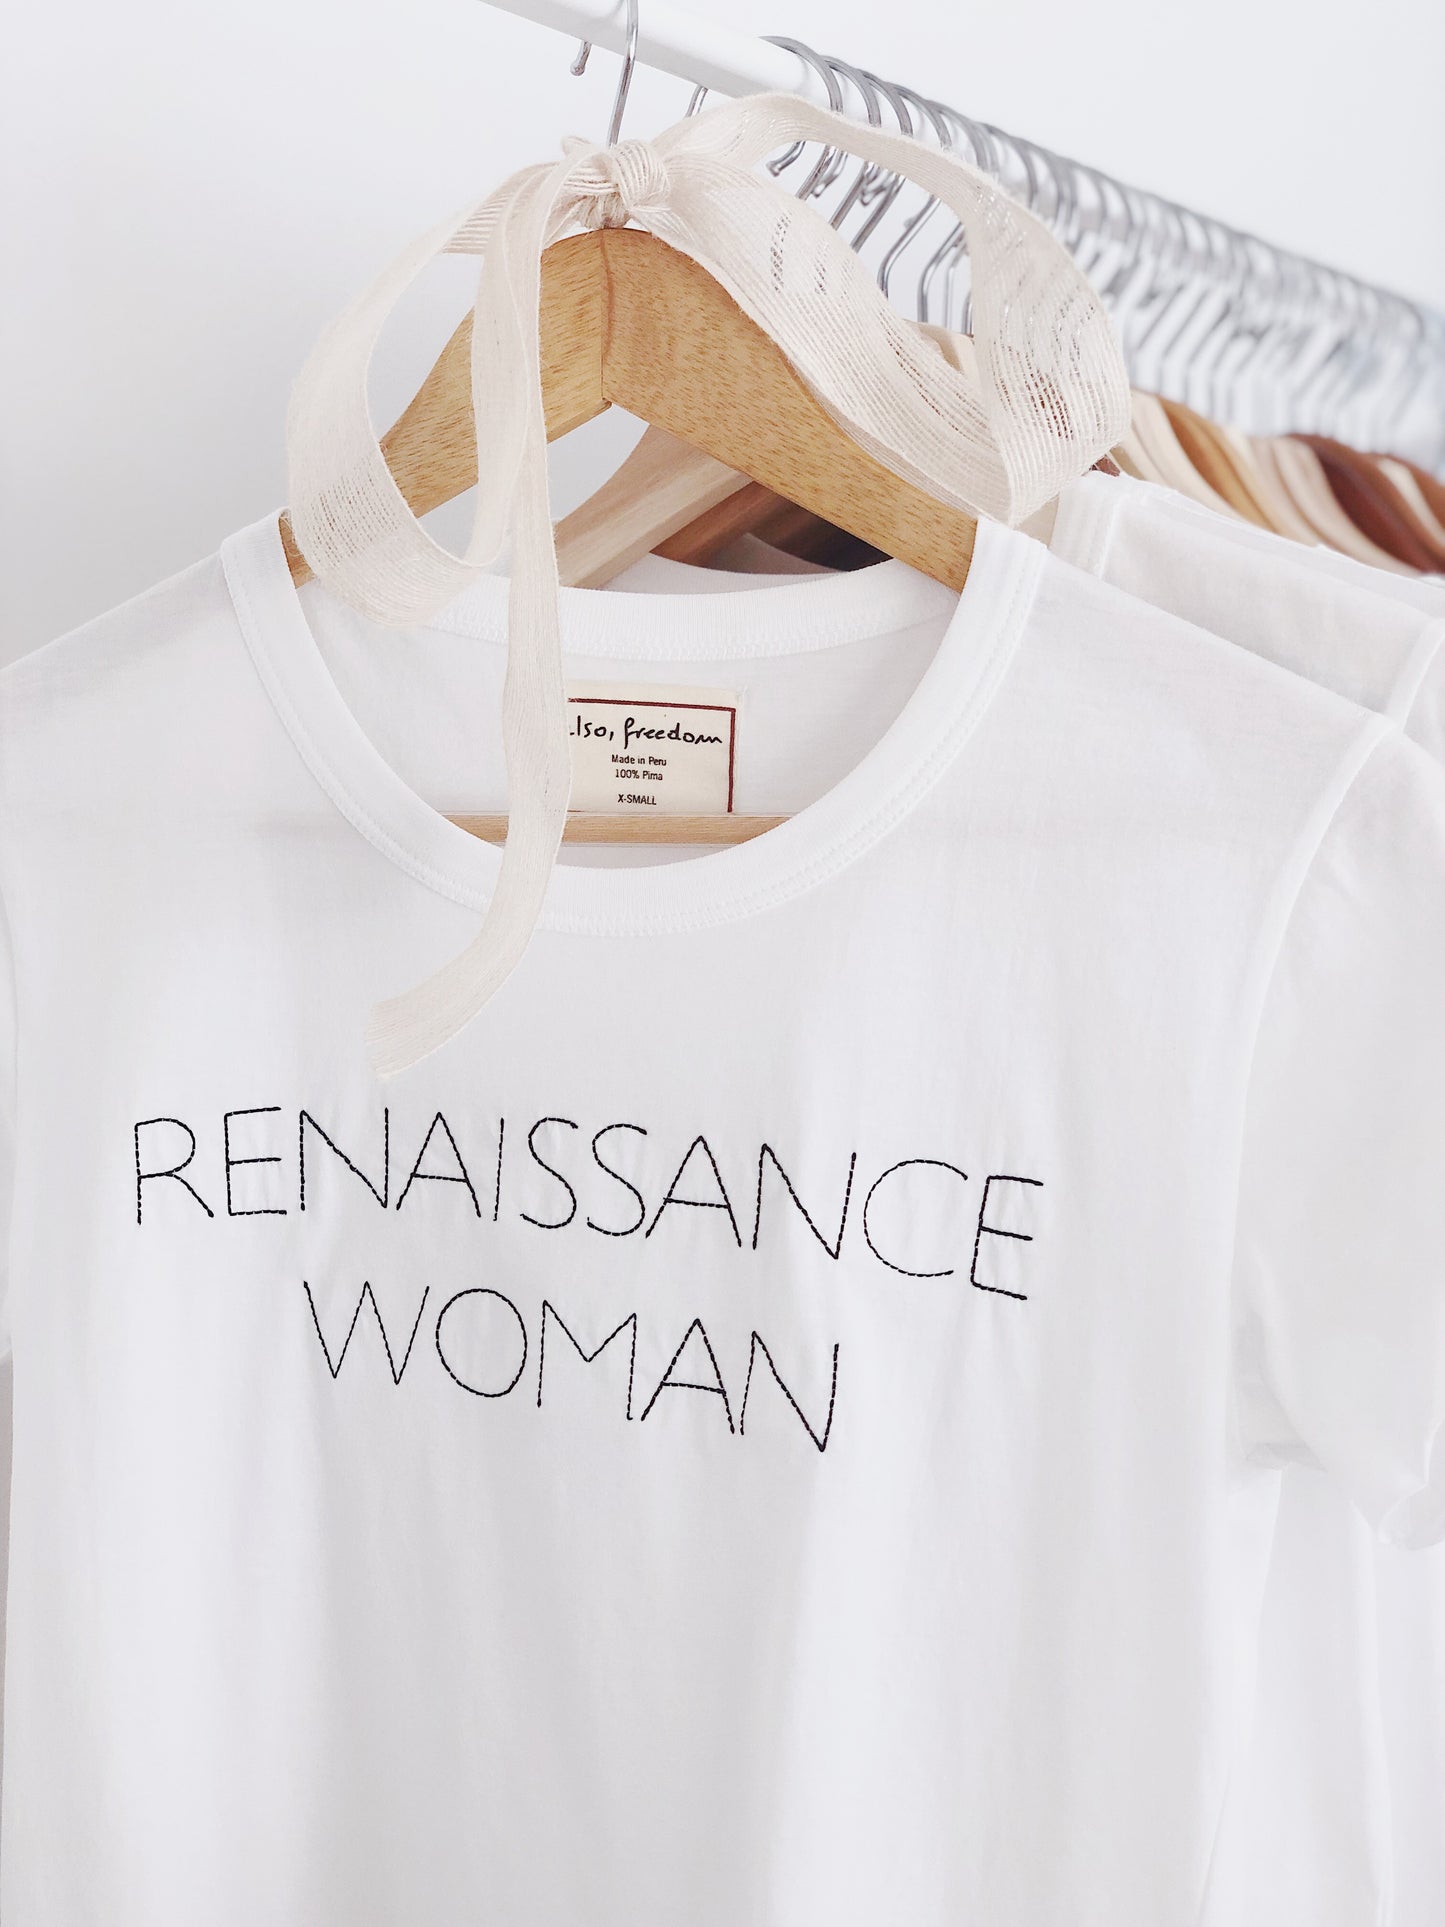 Renaissance Woman, Baby Girl Tee – Also, Freedom